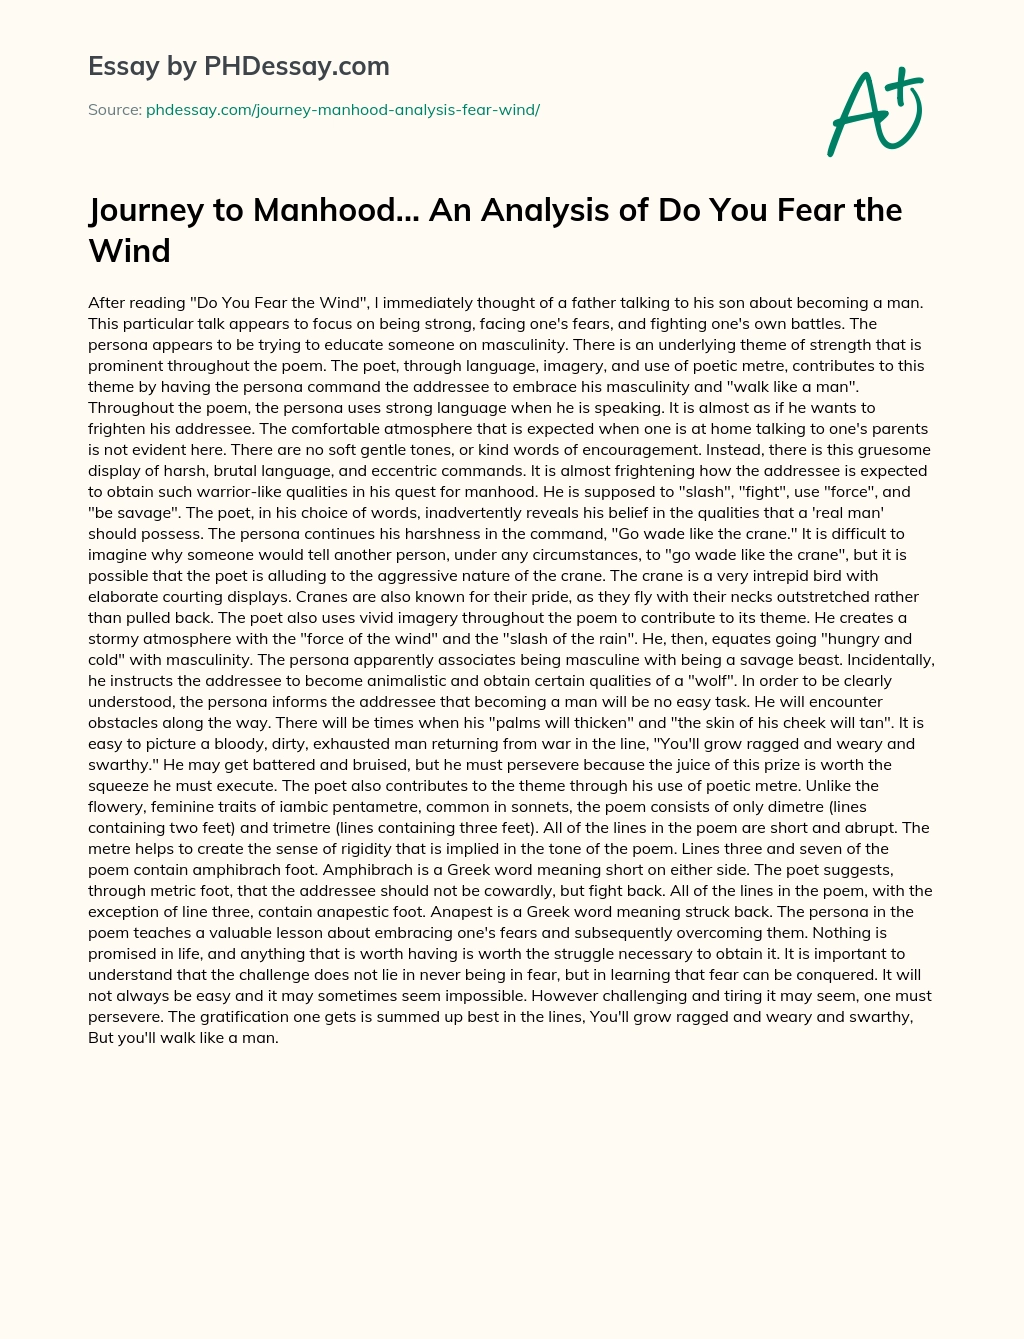 Journey to Manhood… An Analysis of Do You Fear the Wind essay